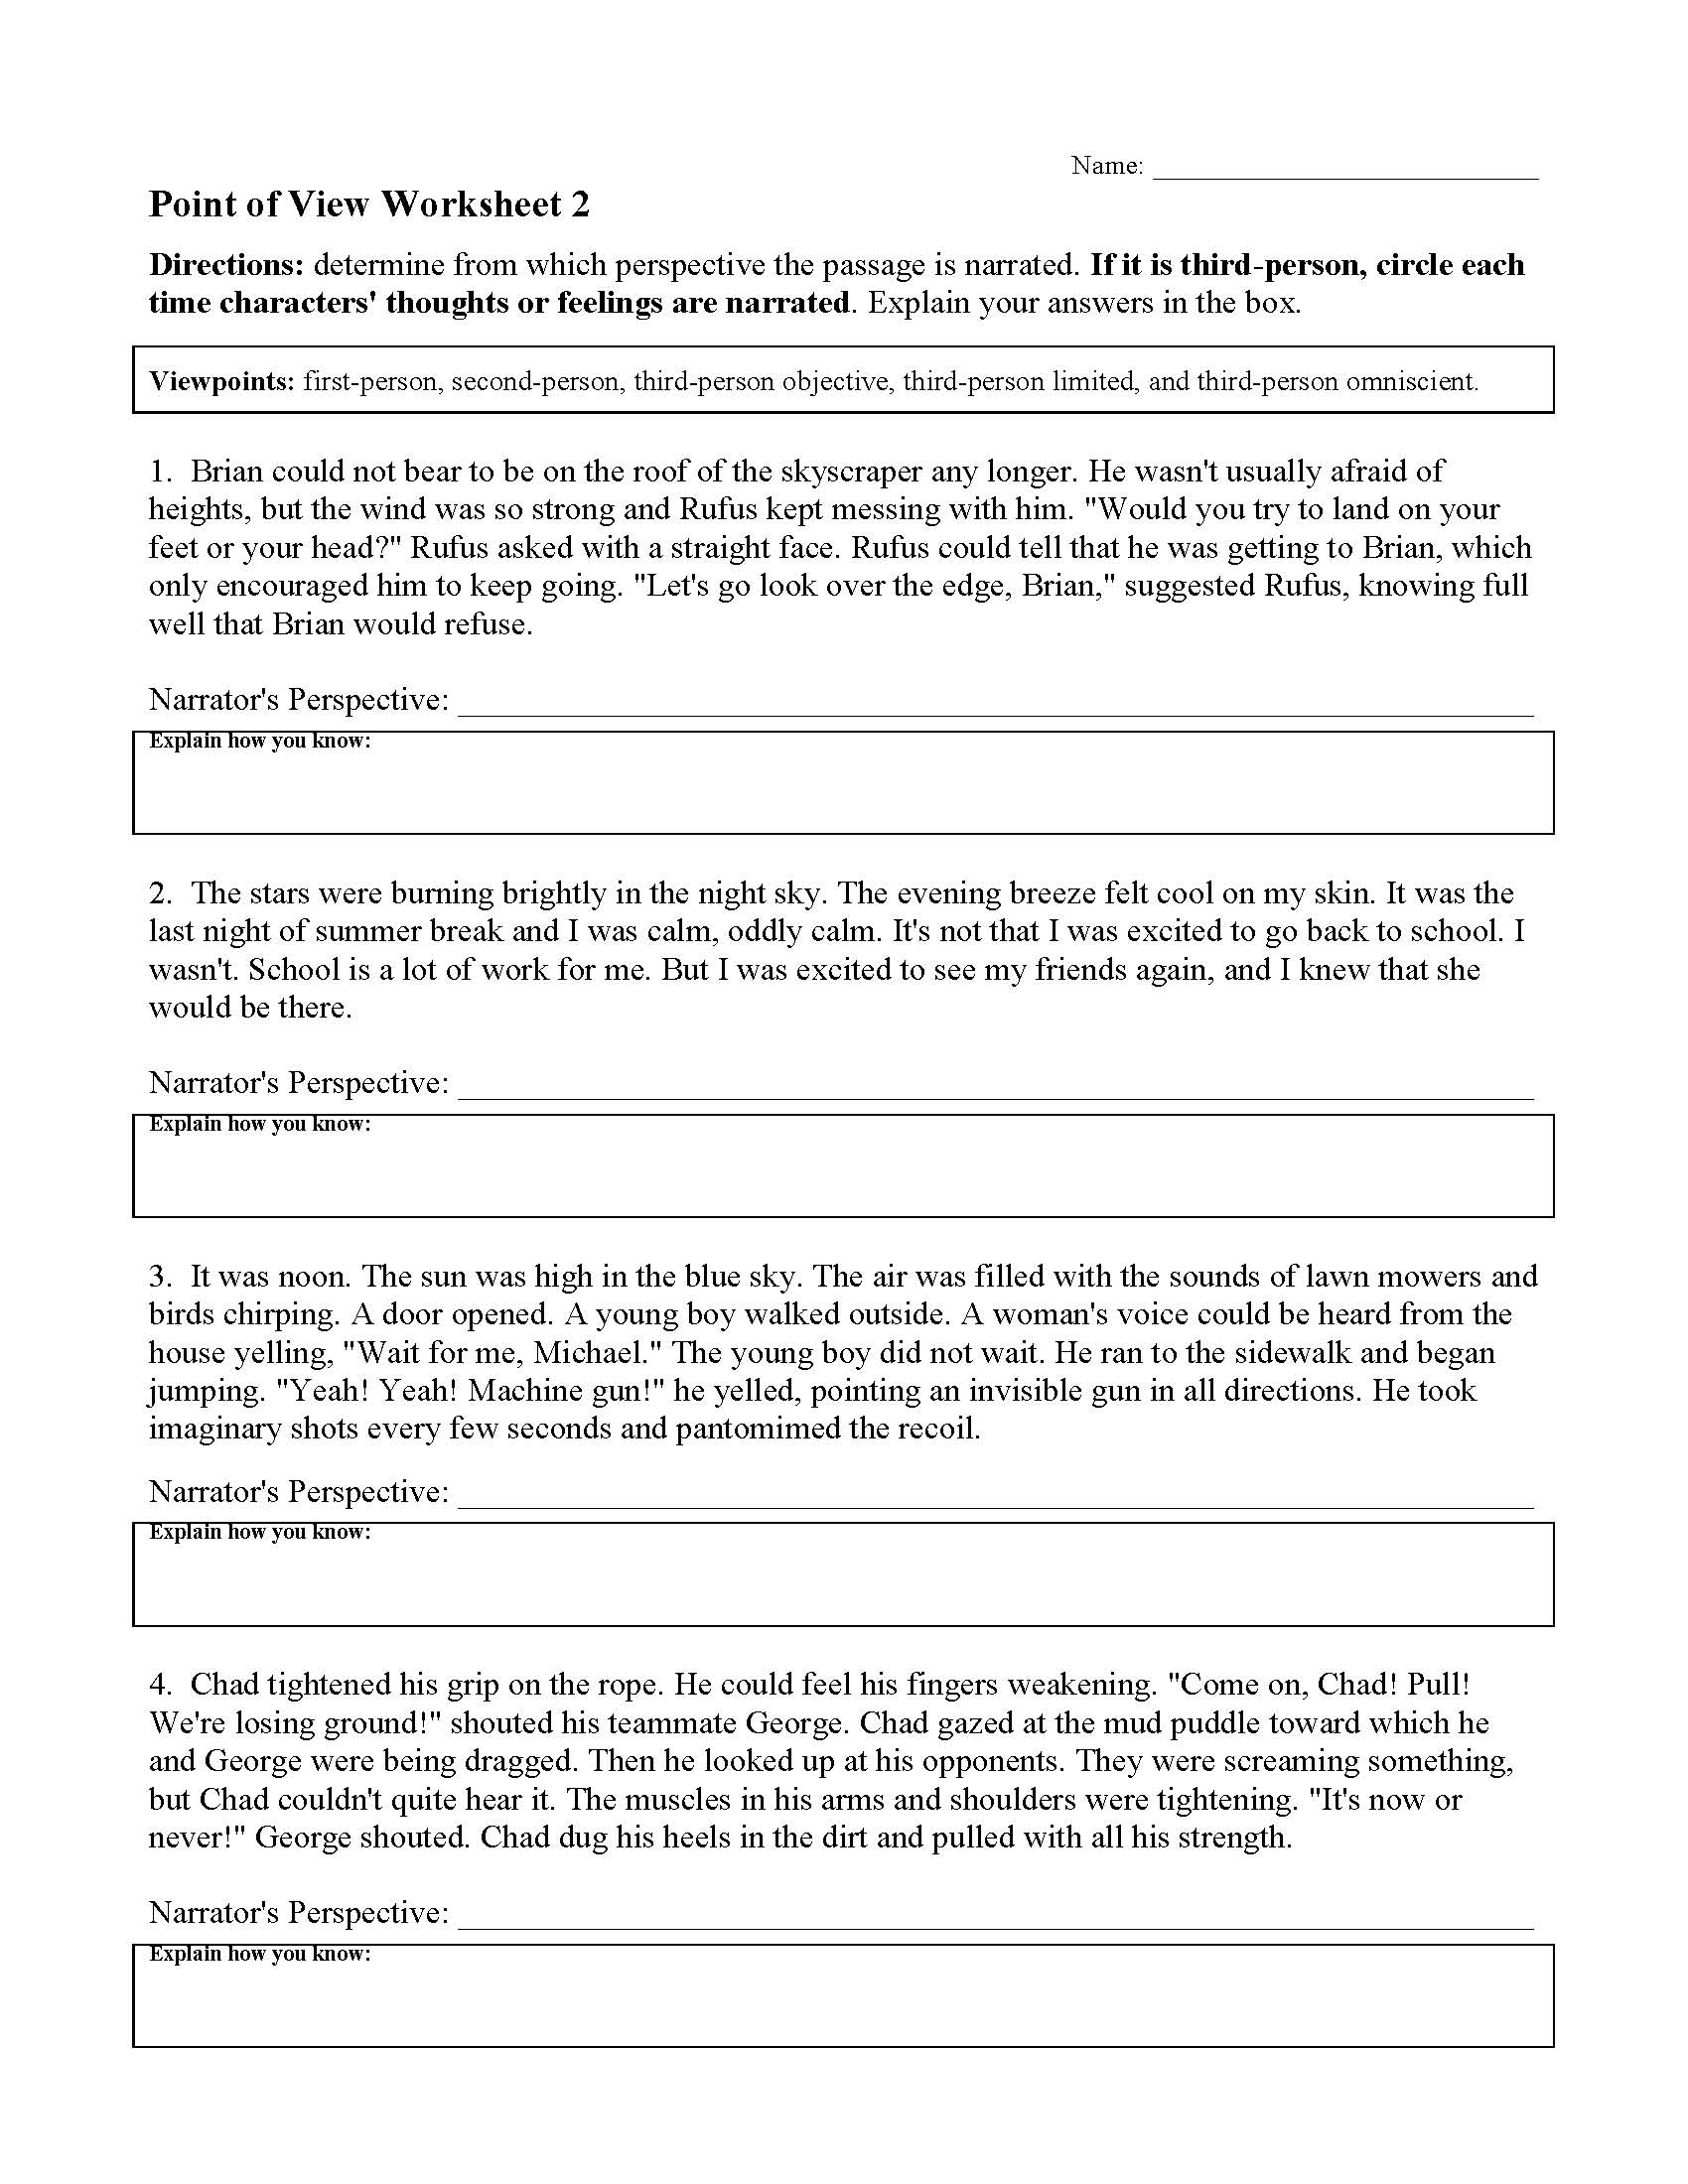 This is a preview image of Point of View Worksheet 2. Click on it to enlarge it or view the source file.